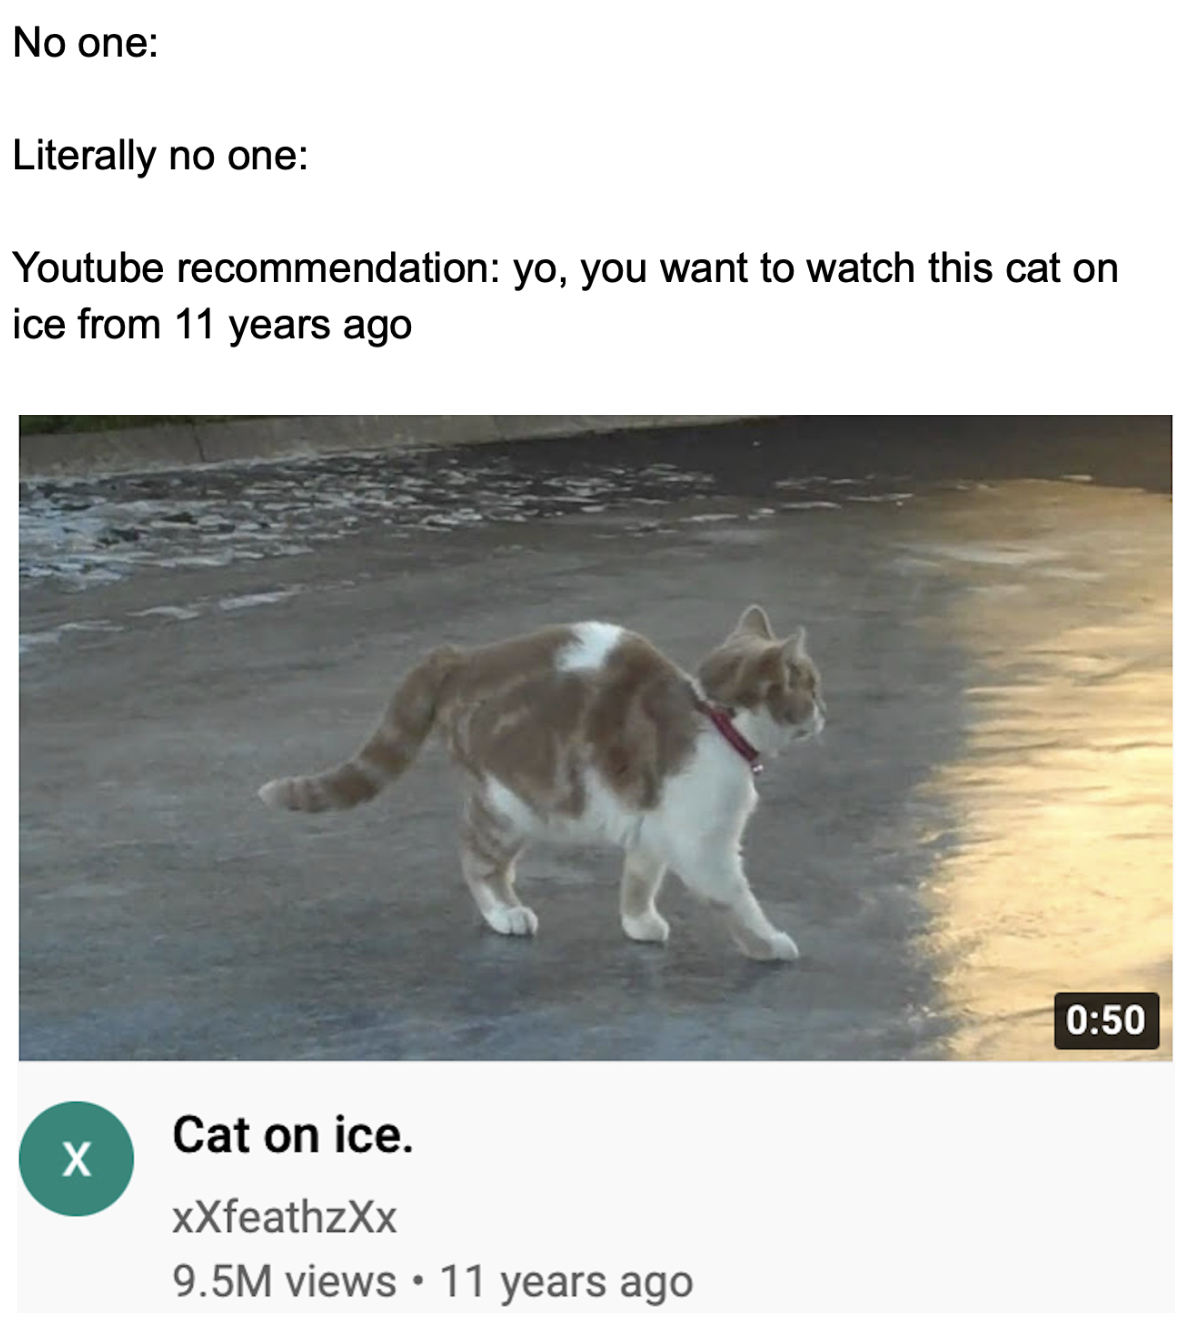 funny gaming memes - fauna - No one Literally no one Youtube recommendation yo, you want to watch this cat on ice from 11 years ago Cat on ice. XXfeathzXx 9.5M views 11 years ago